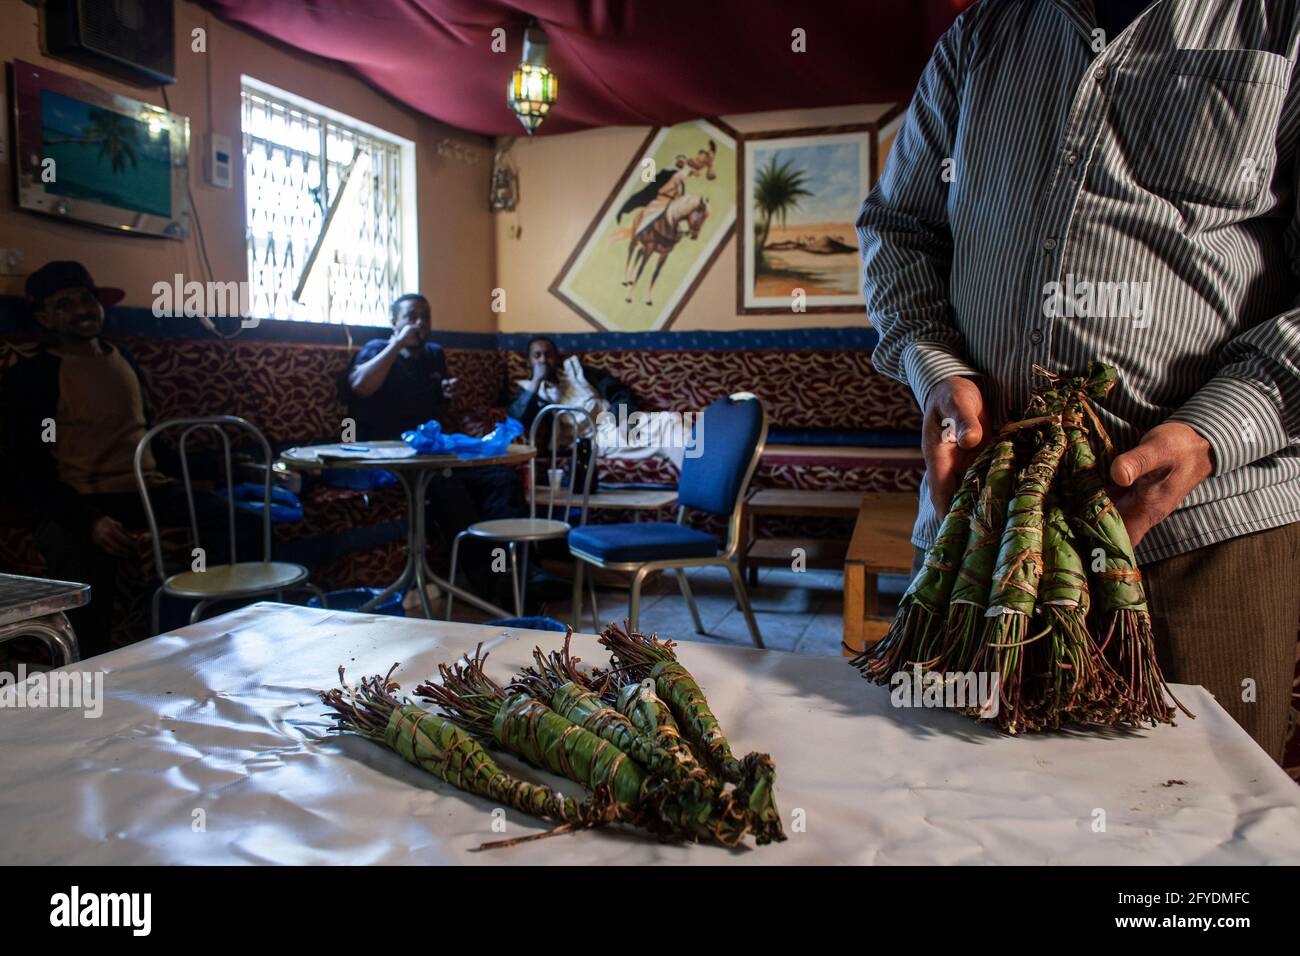 Camden ,London, UK. The drug Khat on the table in local Somali cafe. The drug mainly used by Somalians becomes illegal in the UK. Stock Photo